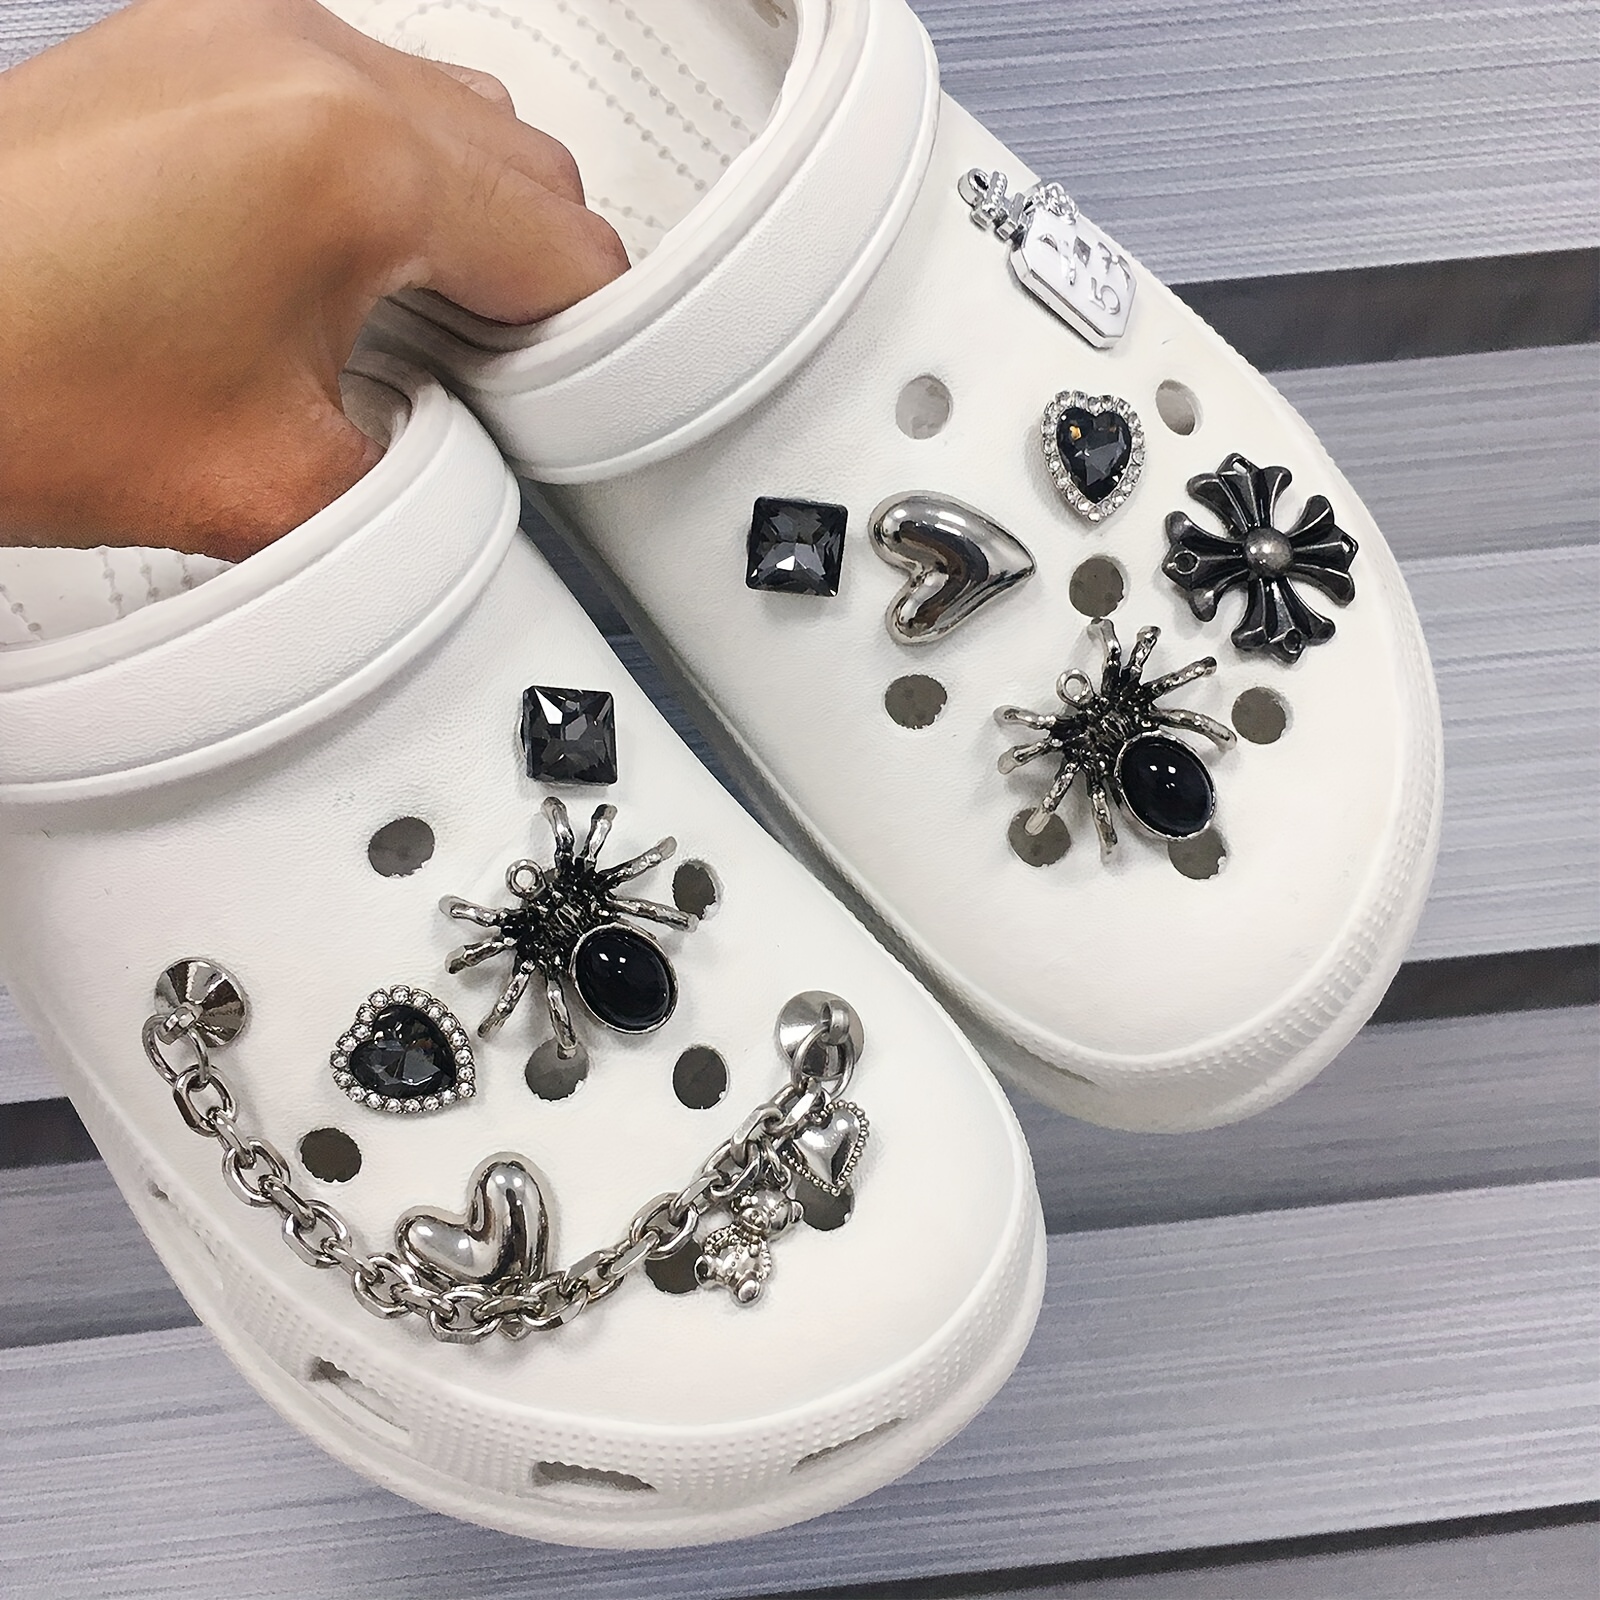 Charms For Crocs, Bling Shoes Charms Gothic Y2k Artificial Diamond Shoe  Decoration With Chains,Spikes Goth Charms Accessories For Men Women Biker  1set